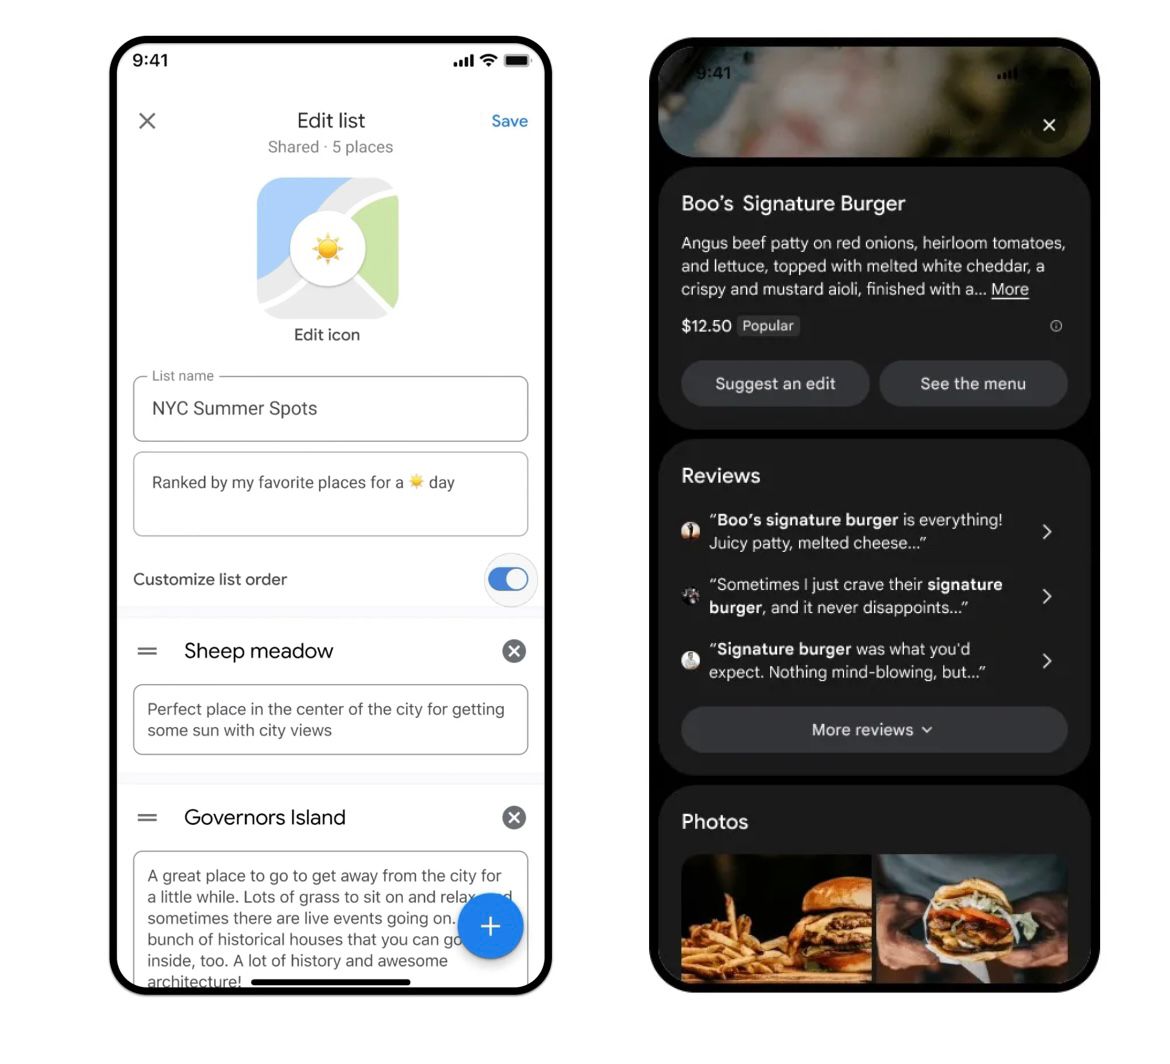 Google is using AI to help identify what dish is shown in a picture and show “helpful information based on the menu — like what it costs, if it’s popular, and even if it’s vegetarian or vegan.”